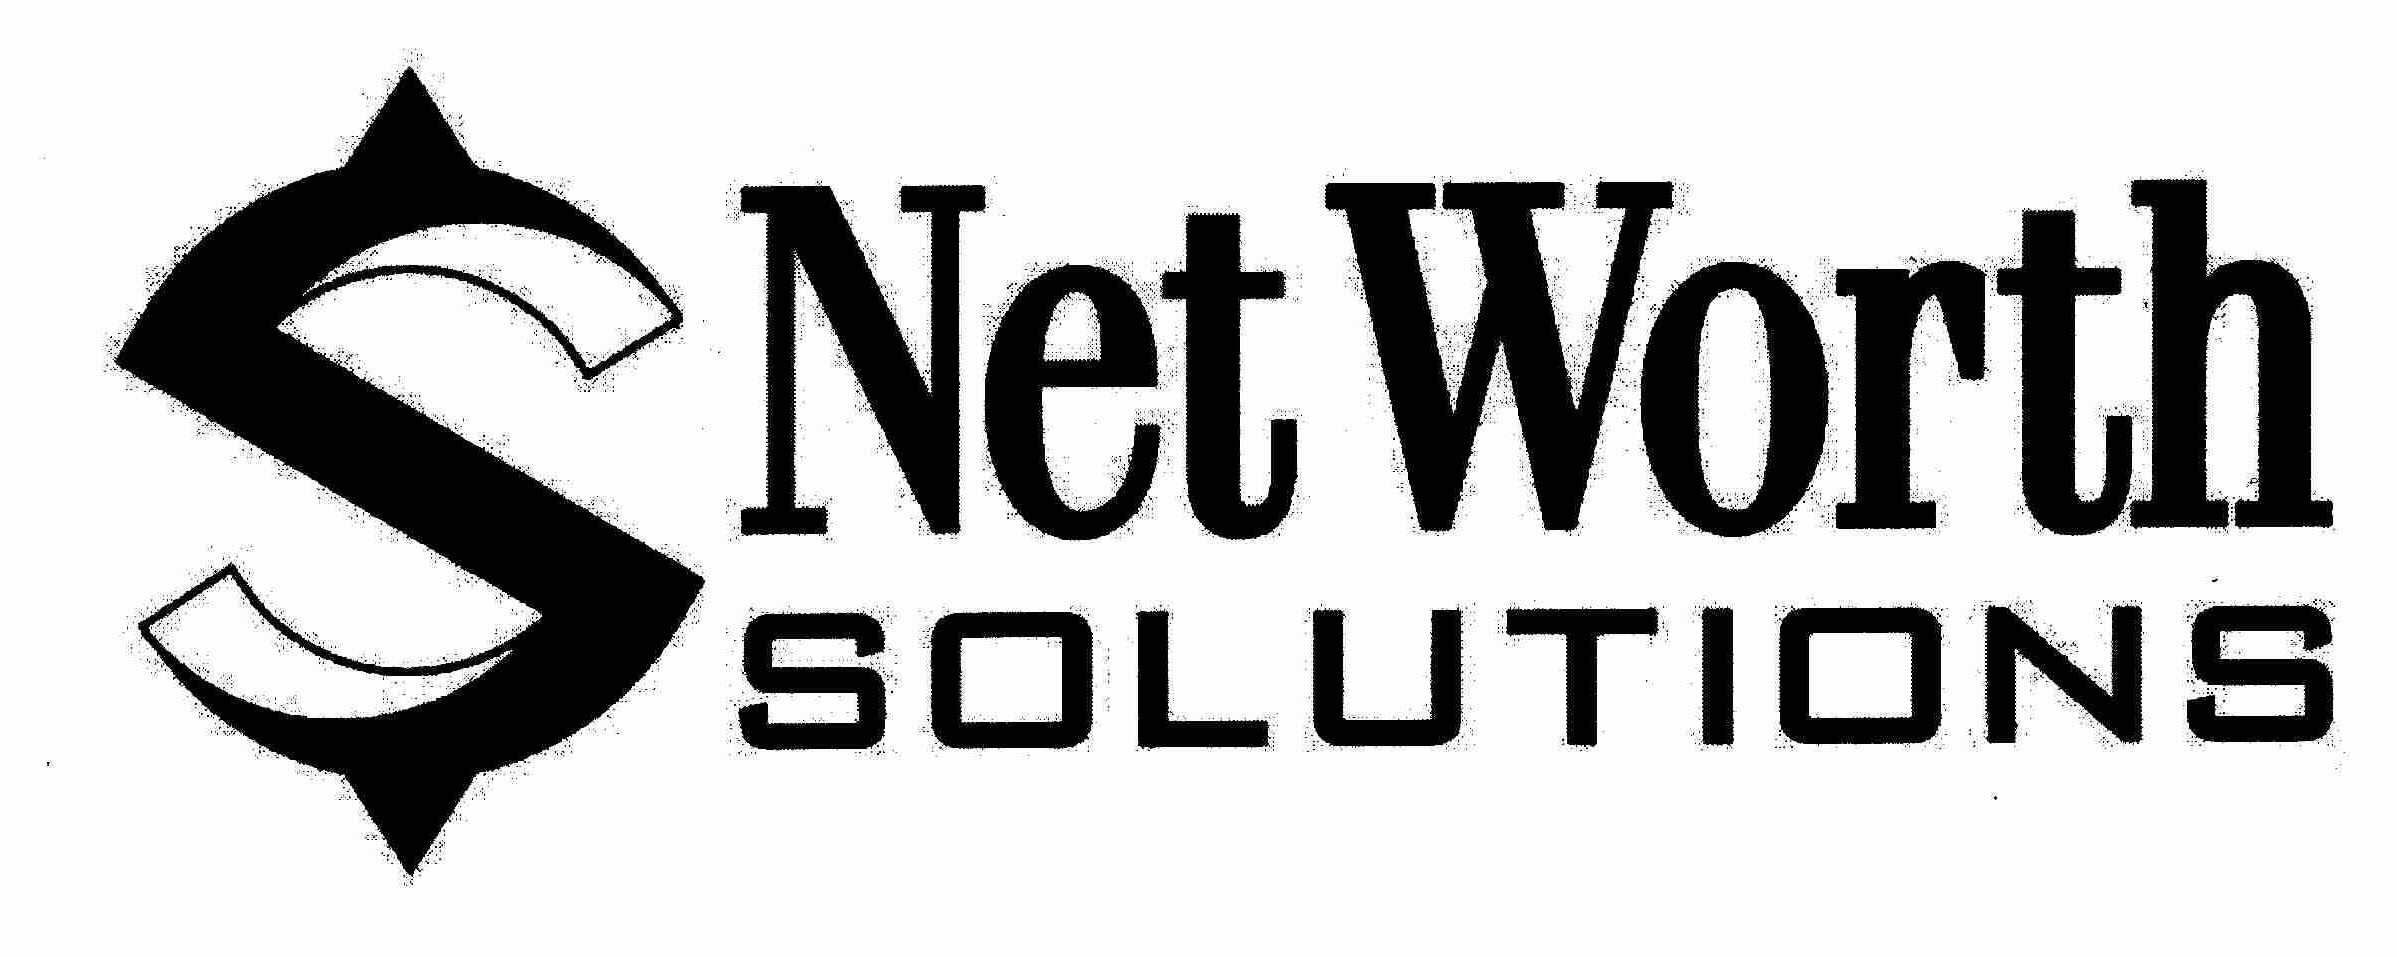  S NET WORTH SOLUTIONS